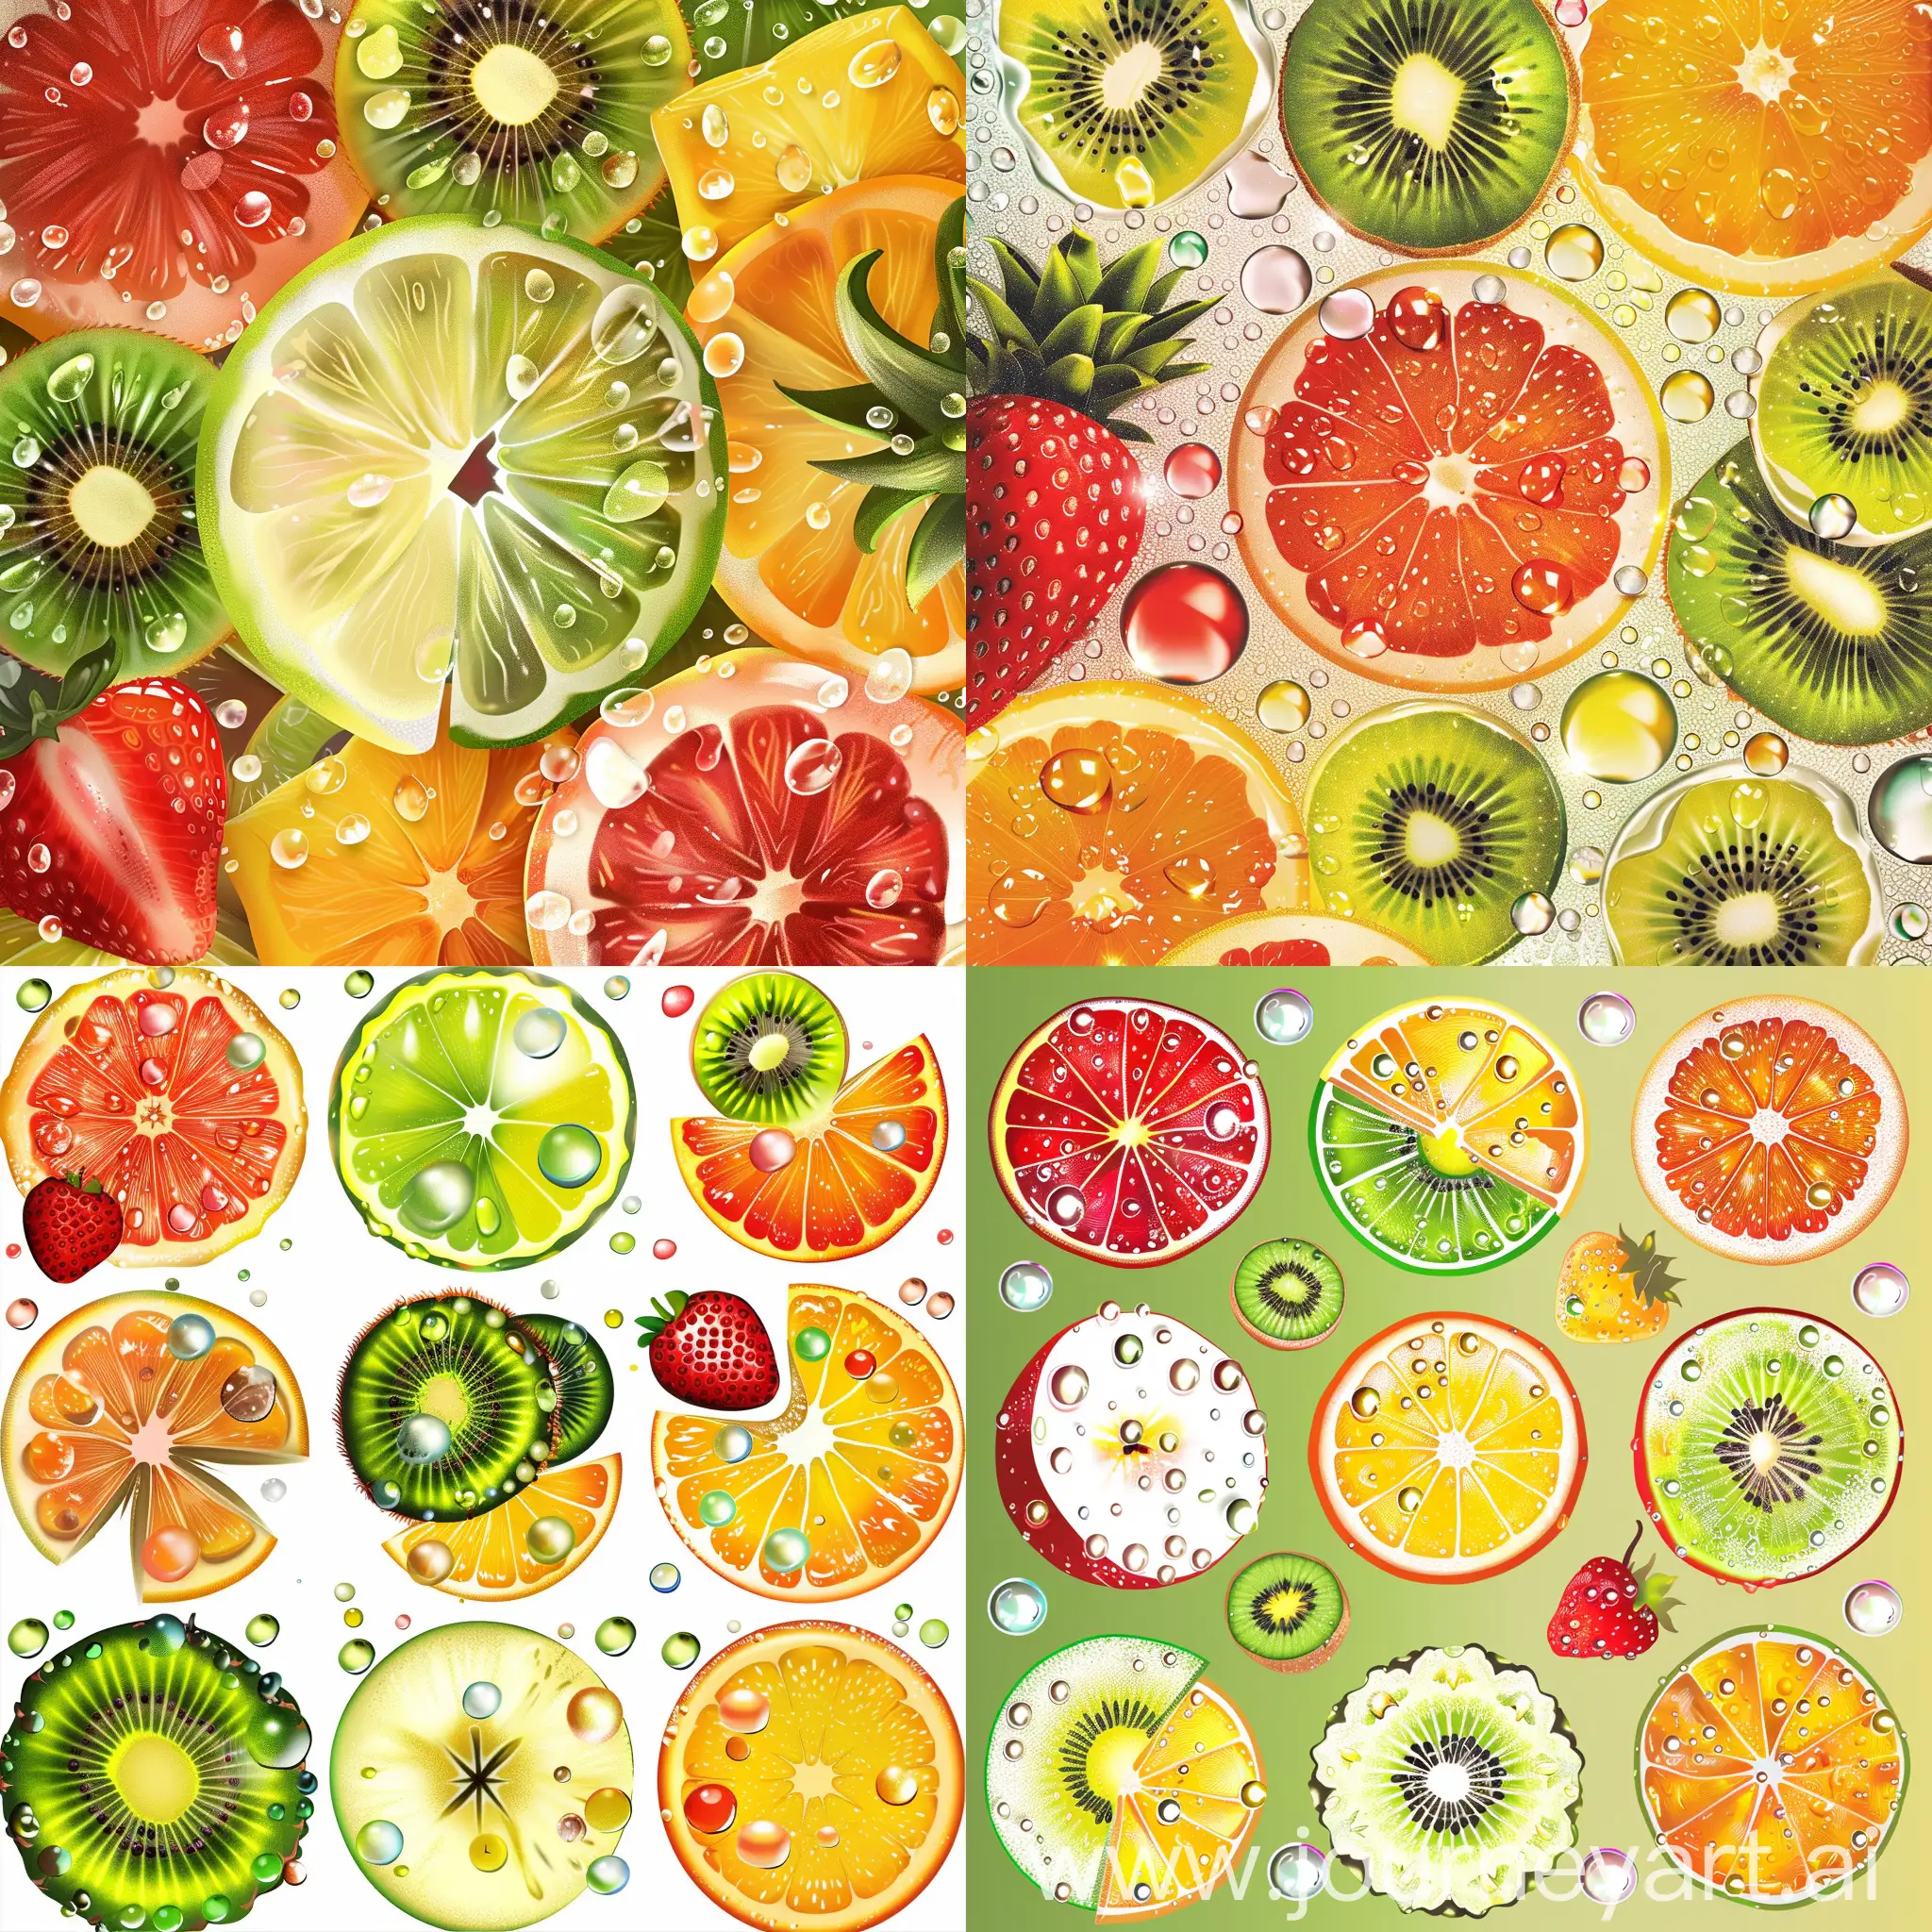 Vibrant-Fresh-Fruit-Slices-with-Glistening-Water-Droplets